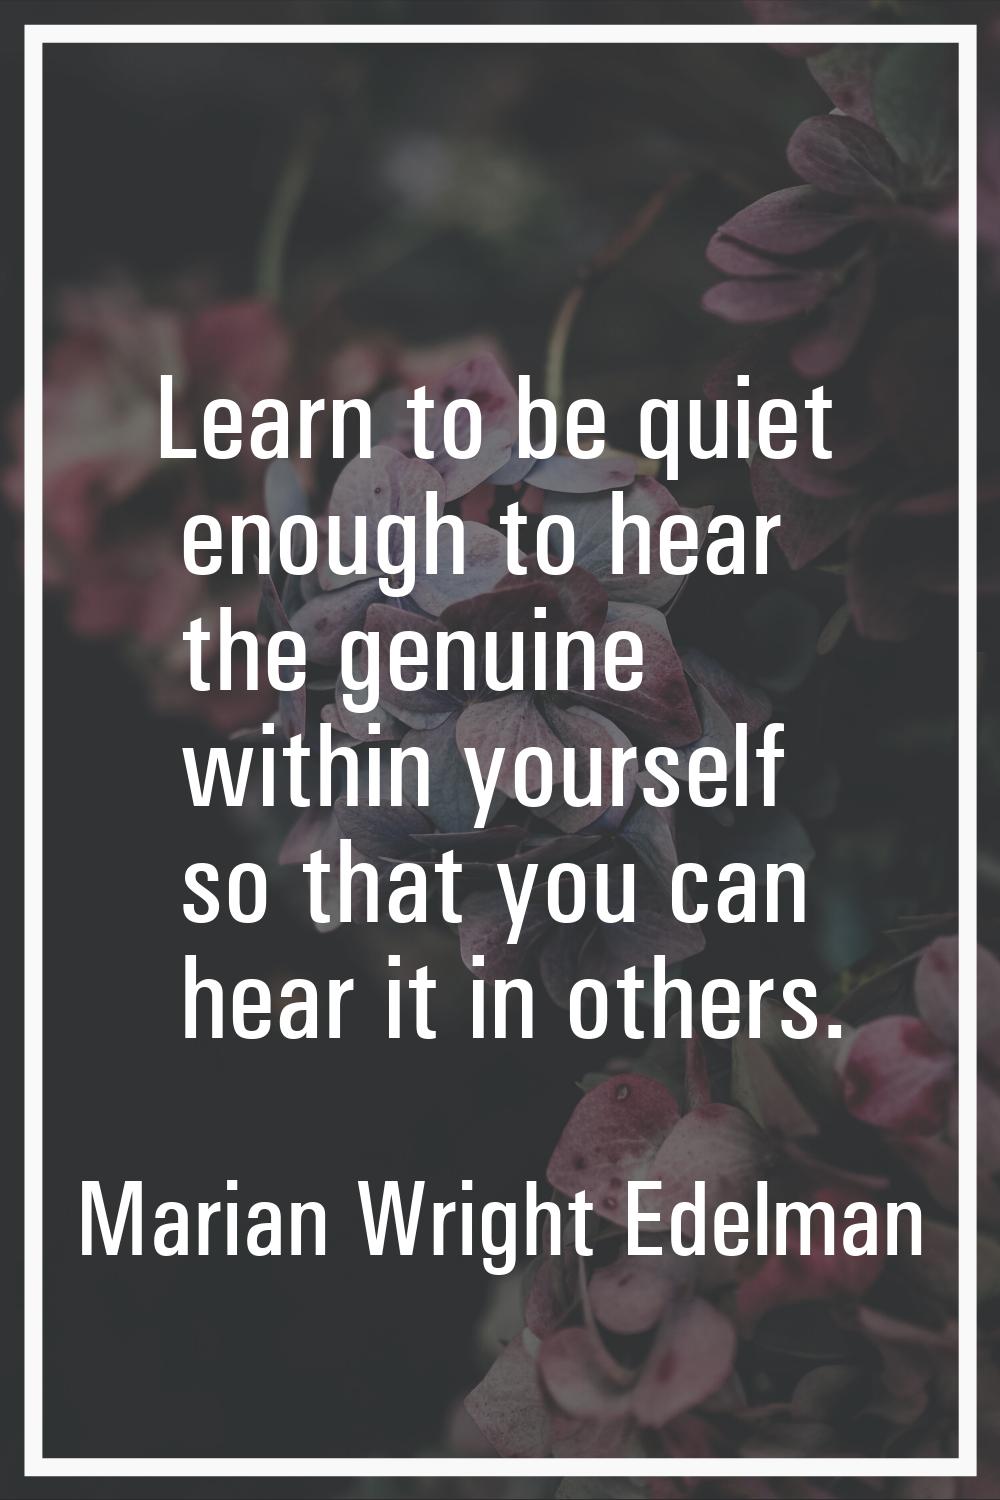 Learn to be quiet enough to hear the genuine within yourself so that you can hear it in others.